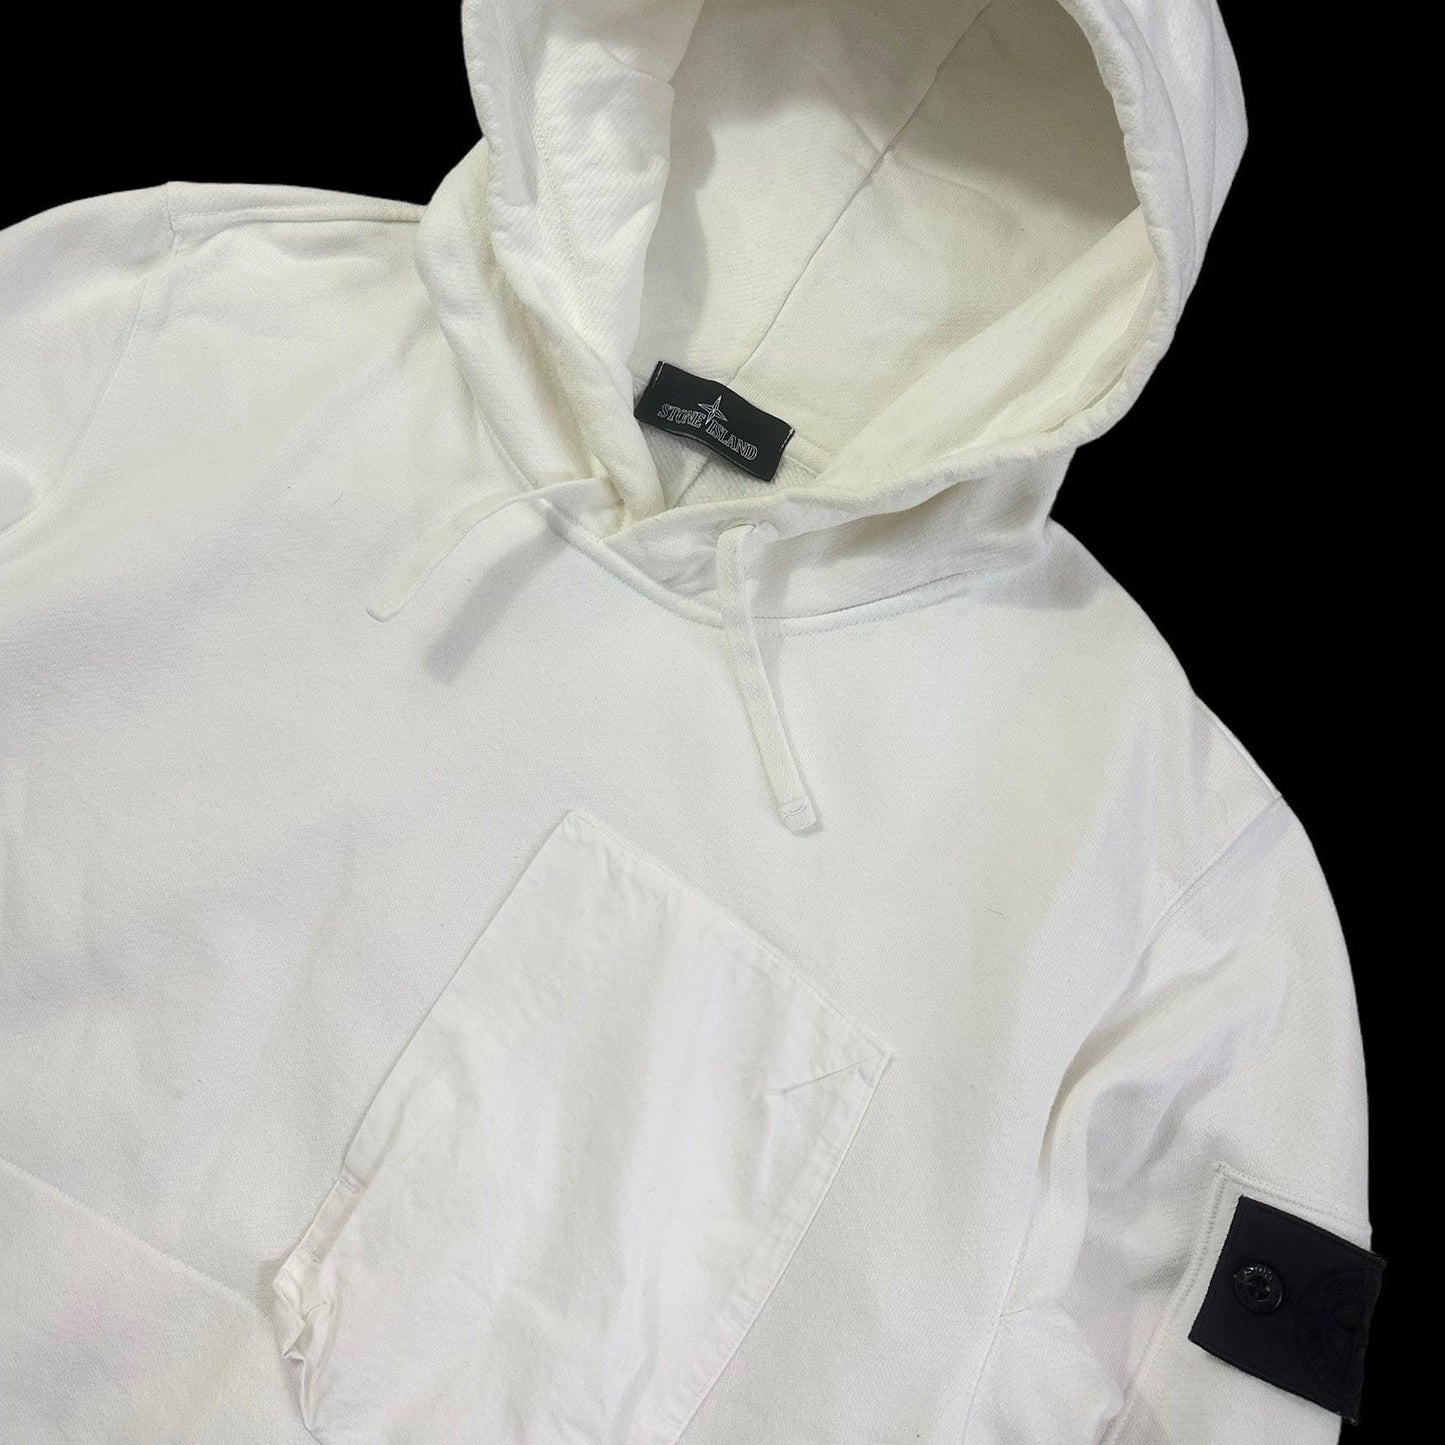 Stone Island Shadow Project Pullover Front Pocket Hoodie - Known Source